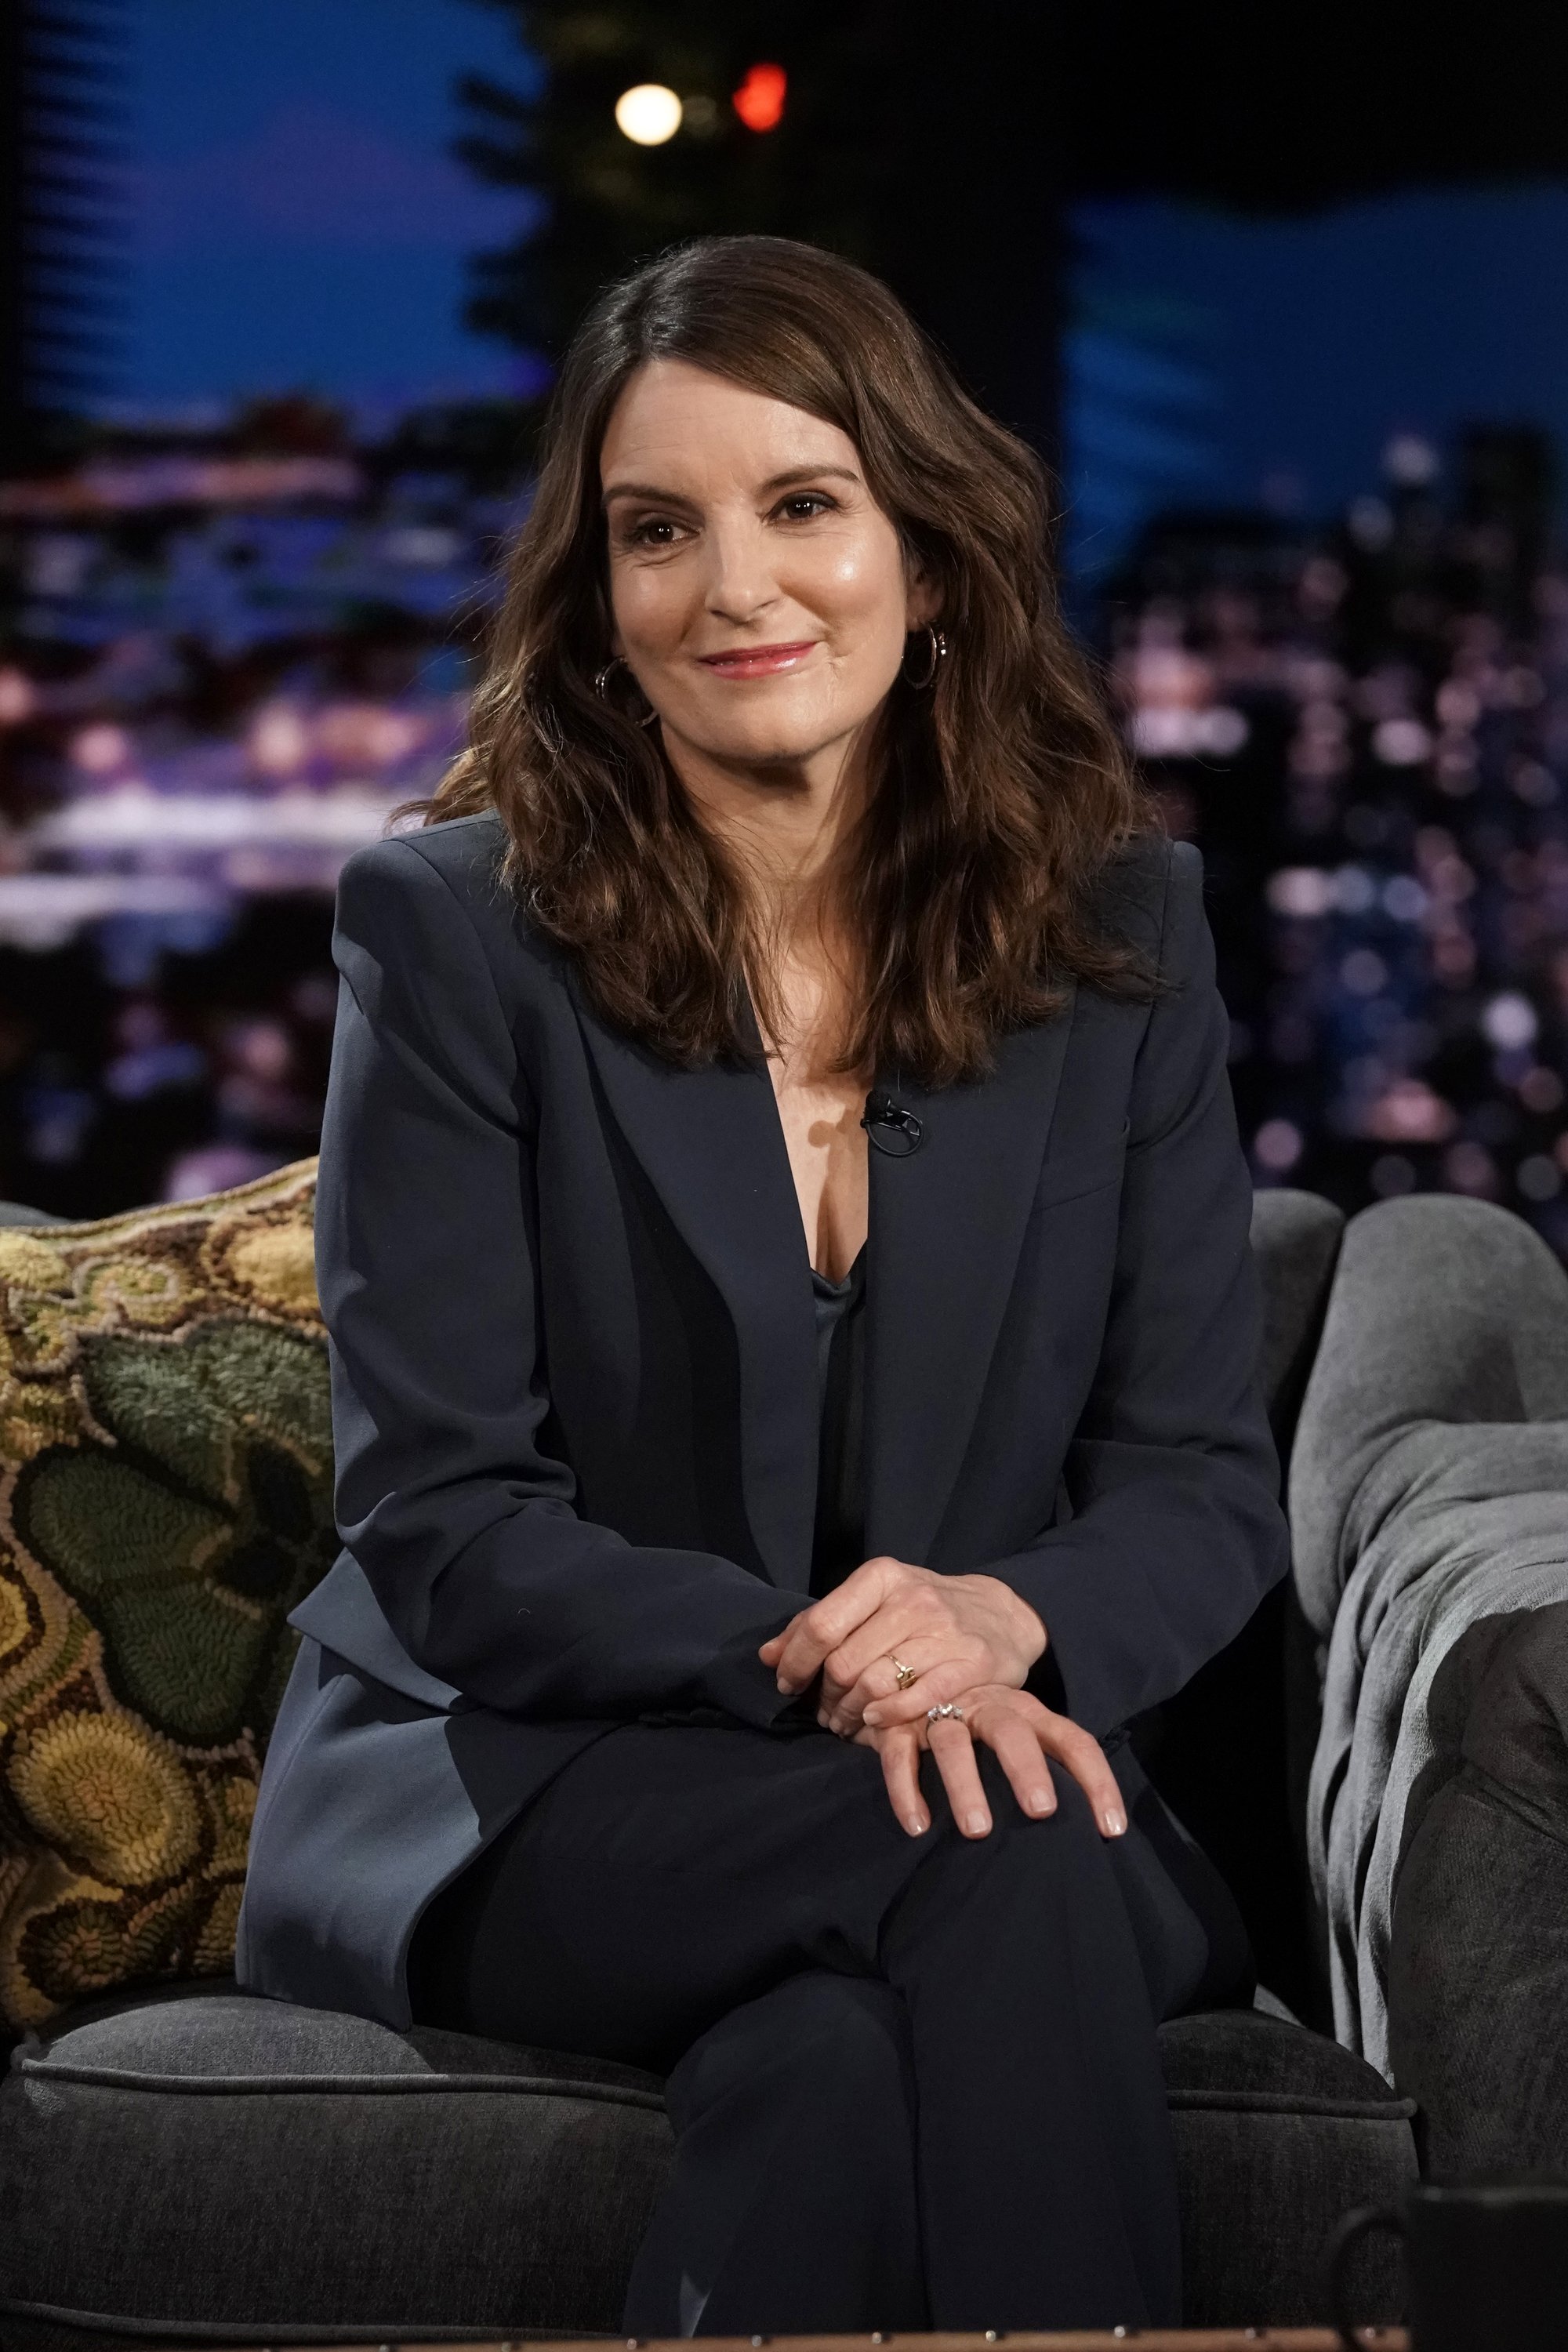  Tina Fey on “The Tonight Show Starring Jimmy Fallon” on December 16, 2020. | Source: Getty Images